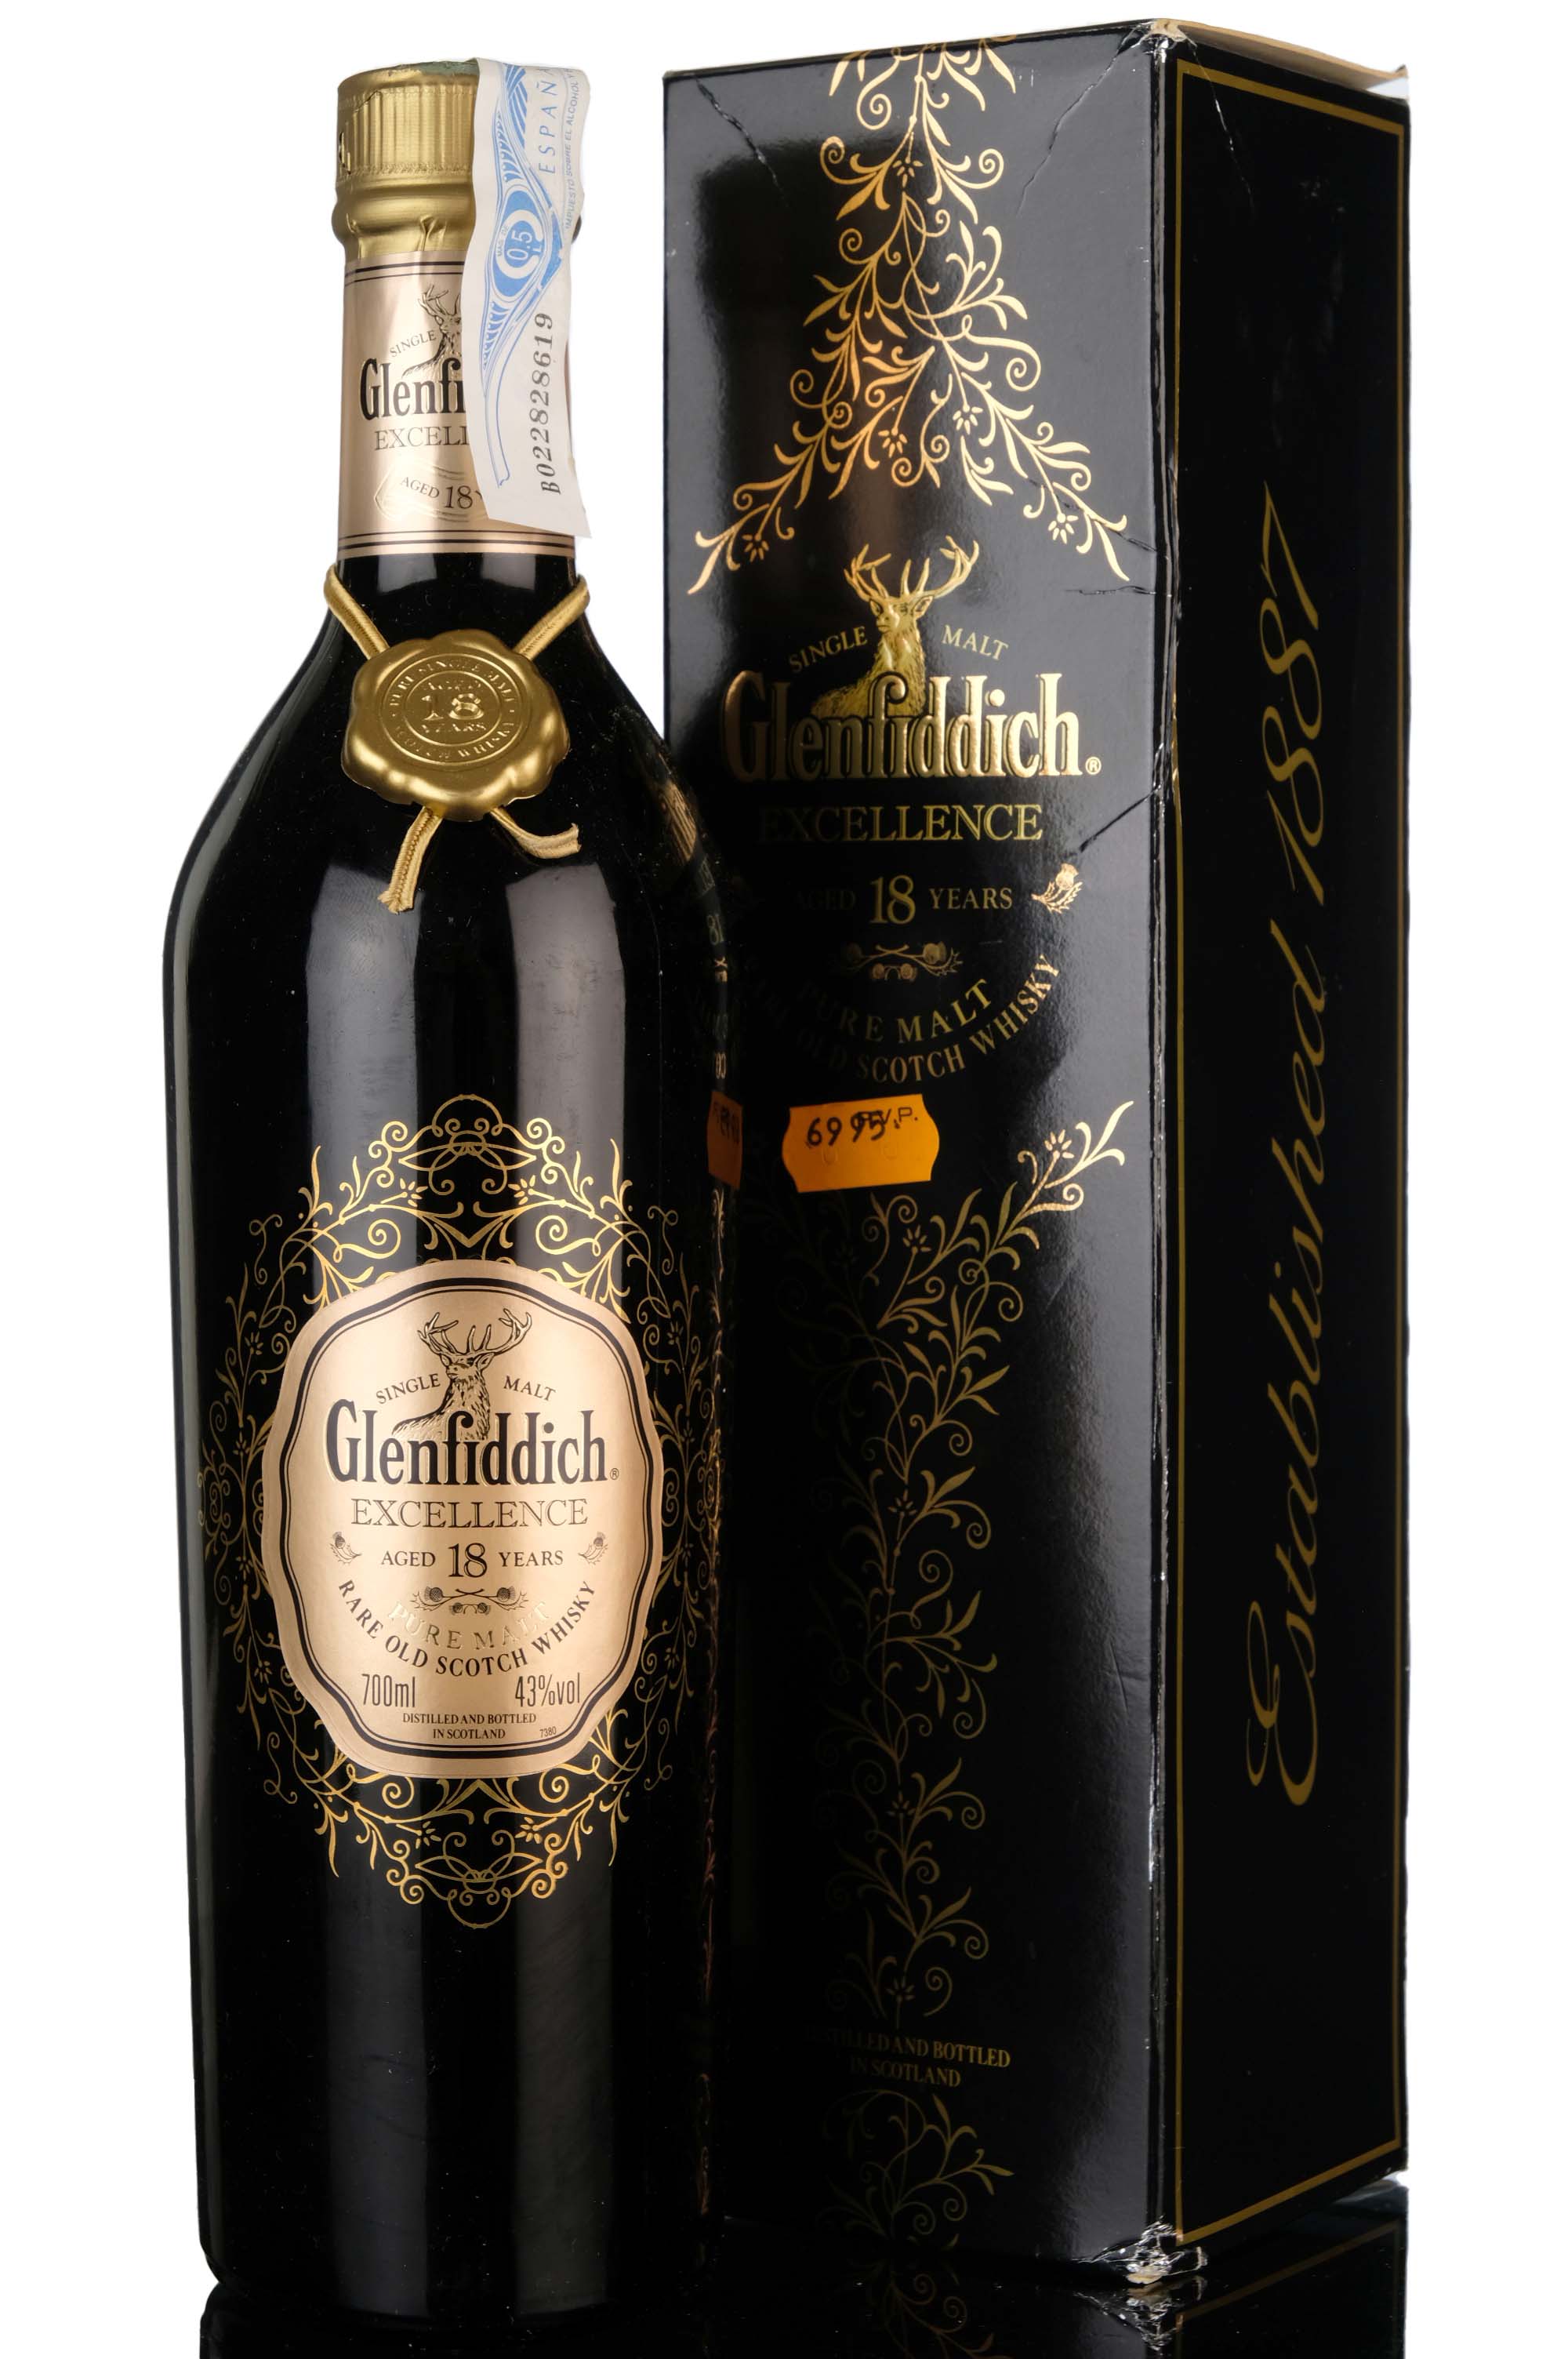 Glenfiddich 18 Year Old - Excellence